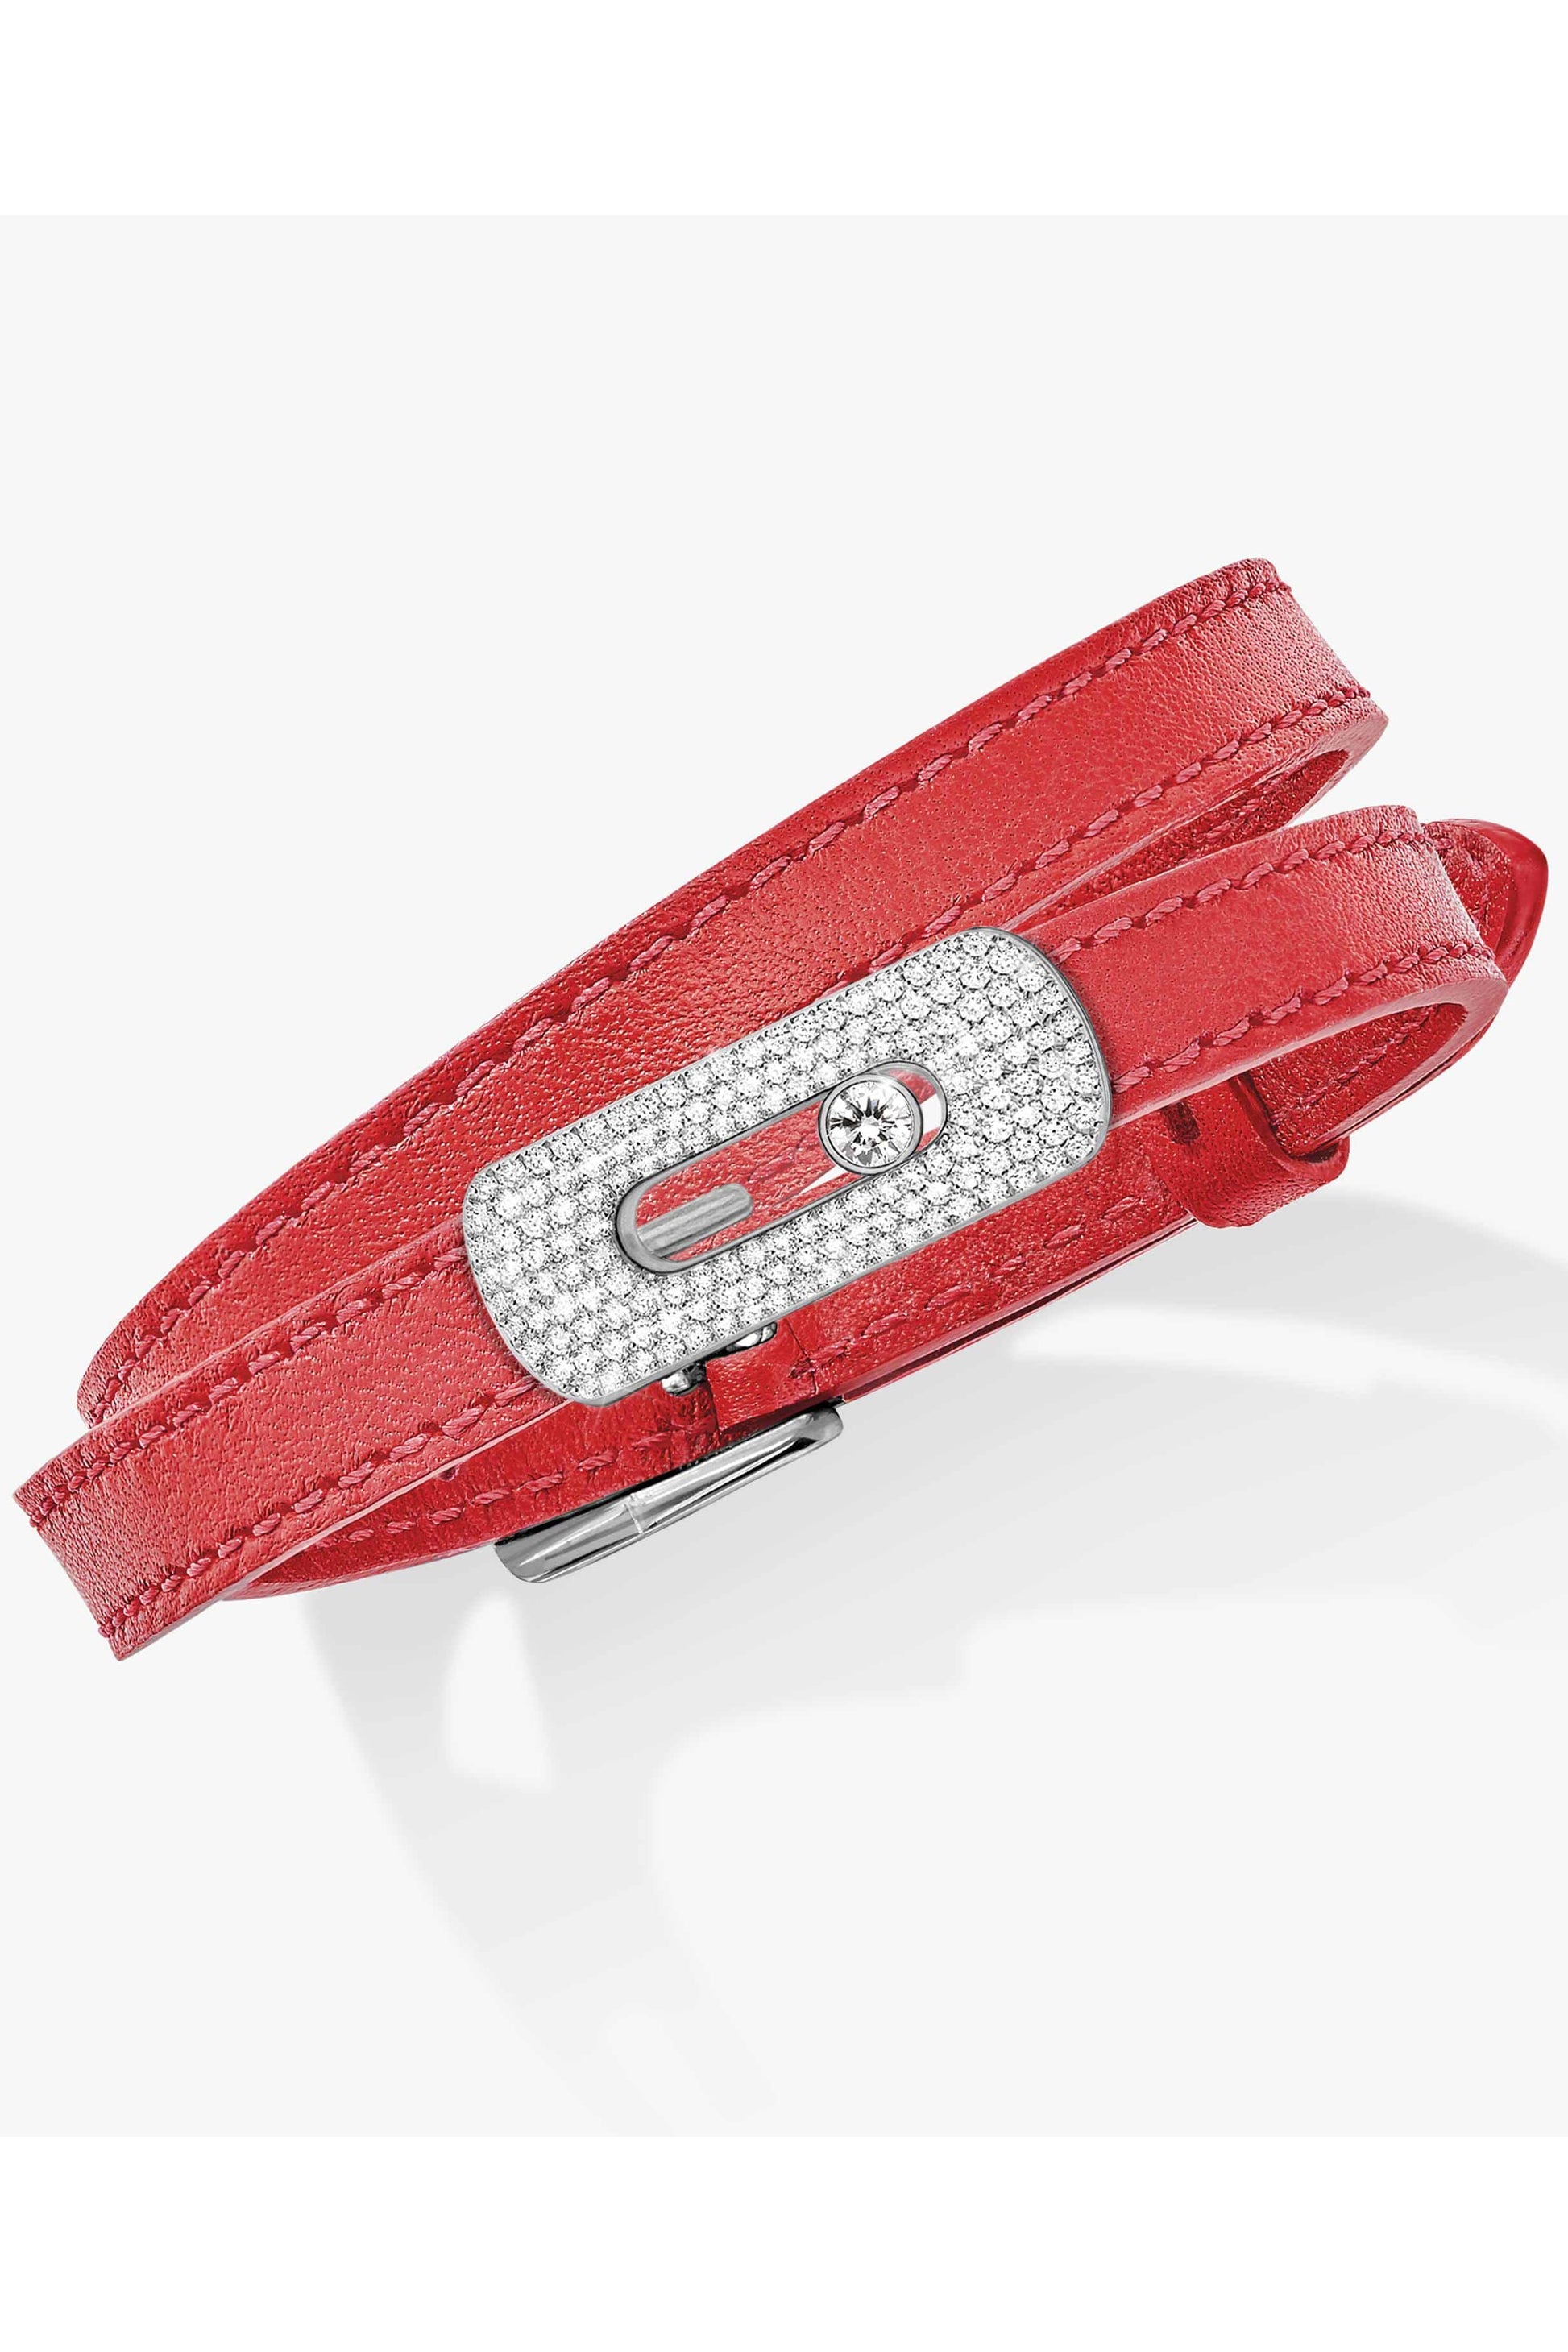 MESSIKA-My Move Leather Bracelet - Cherry Red-RED